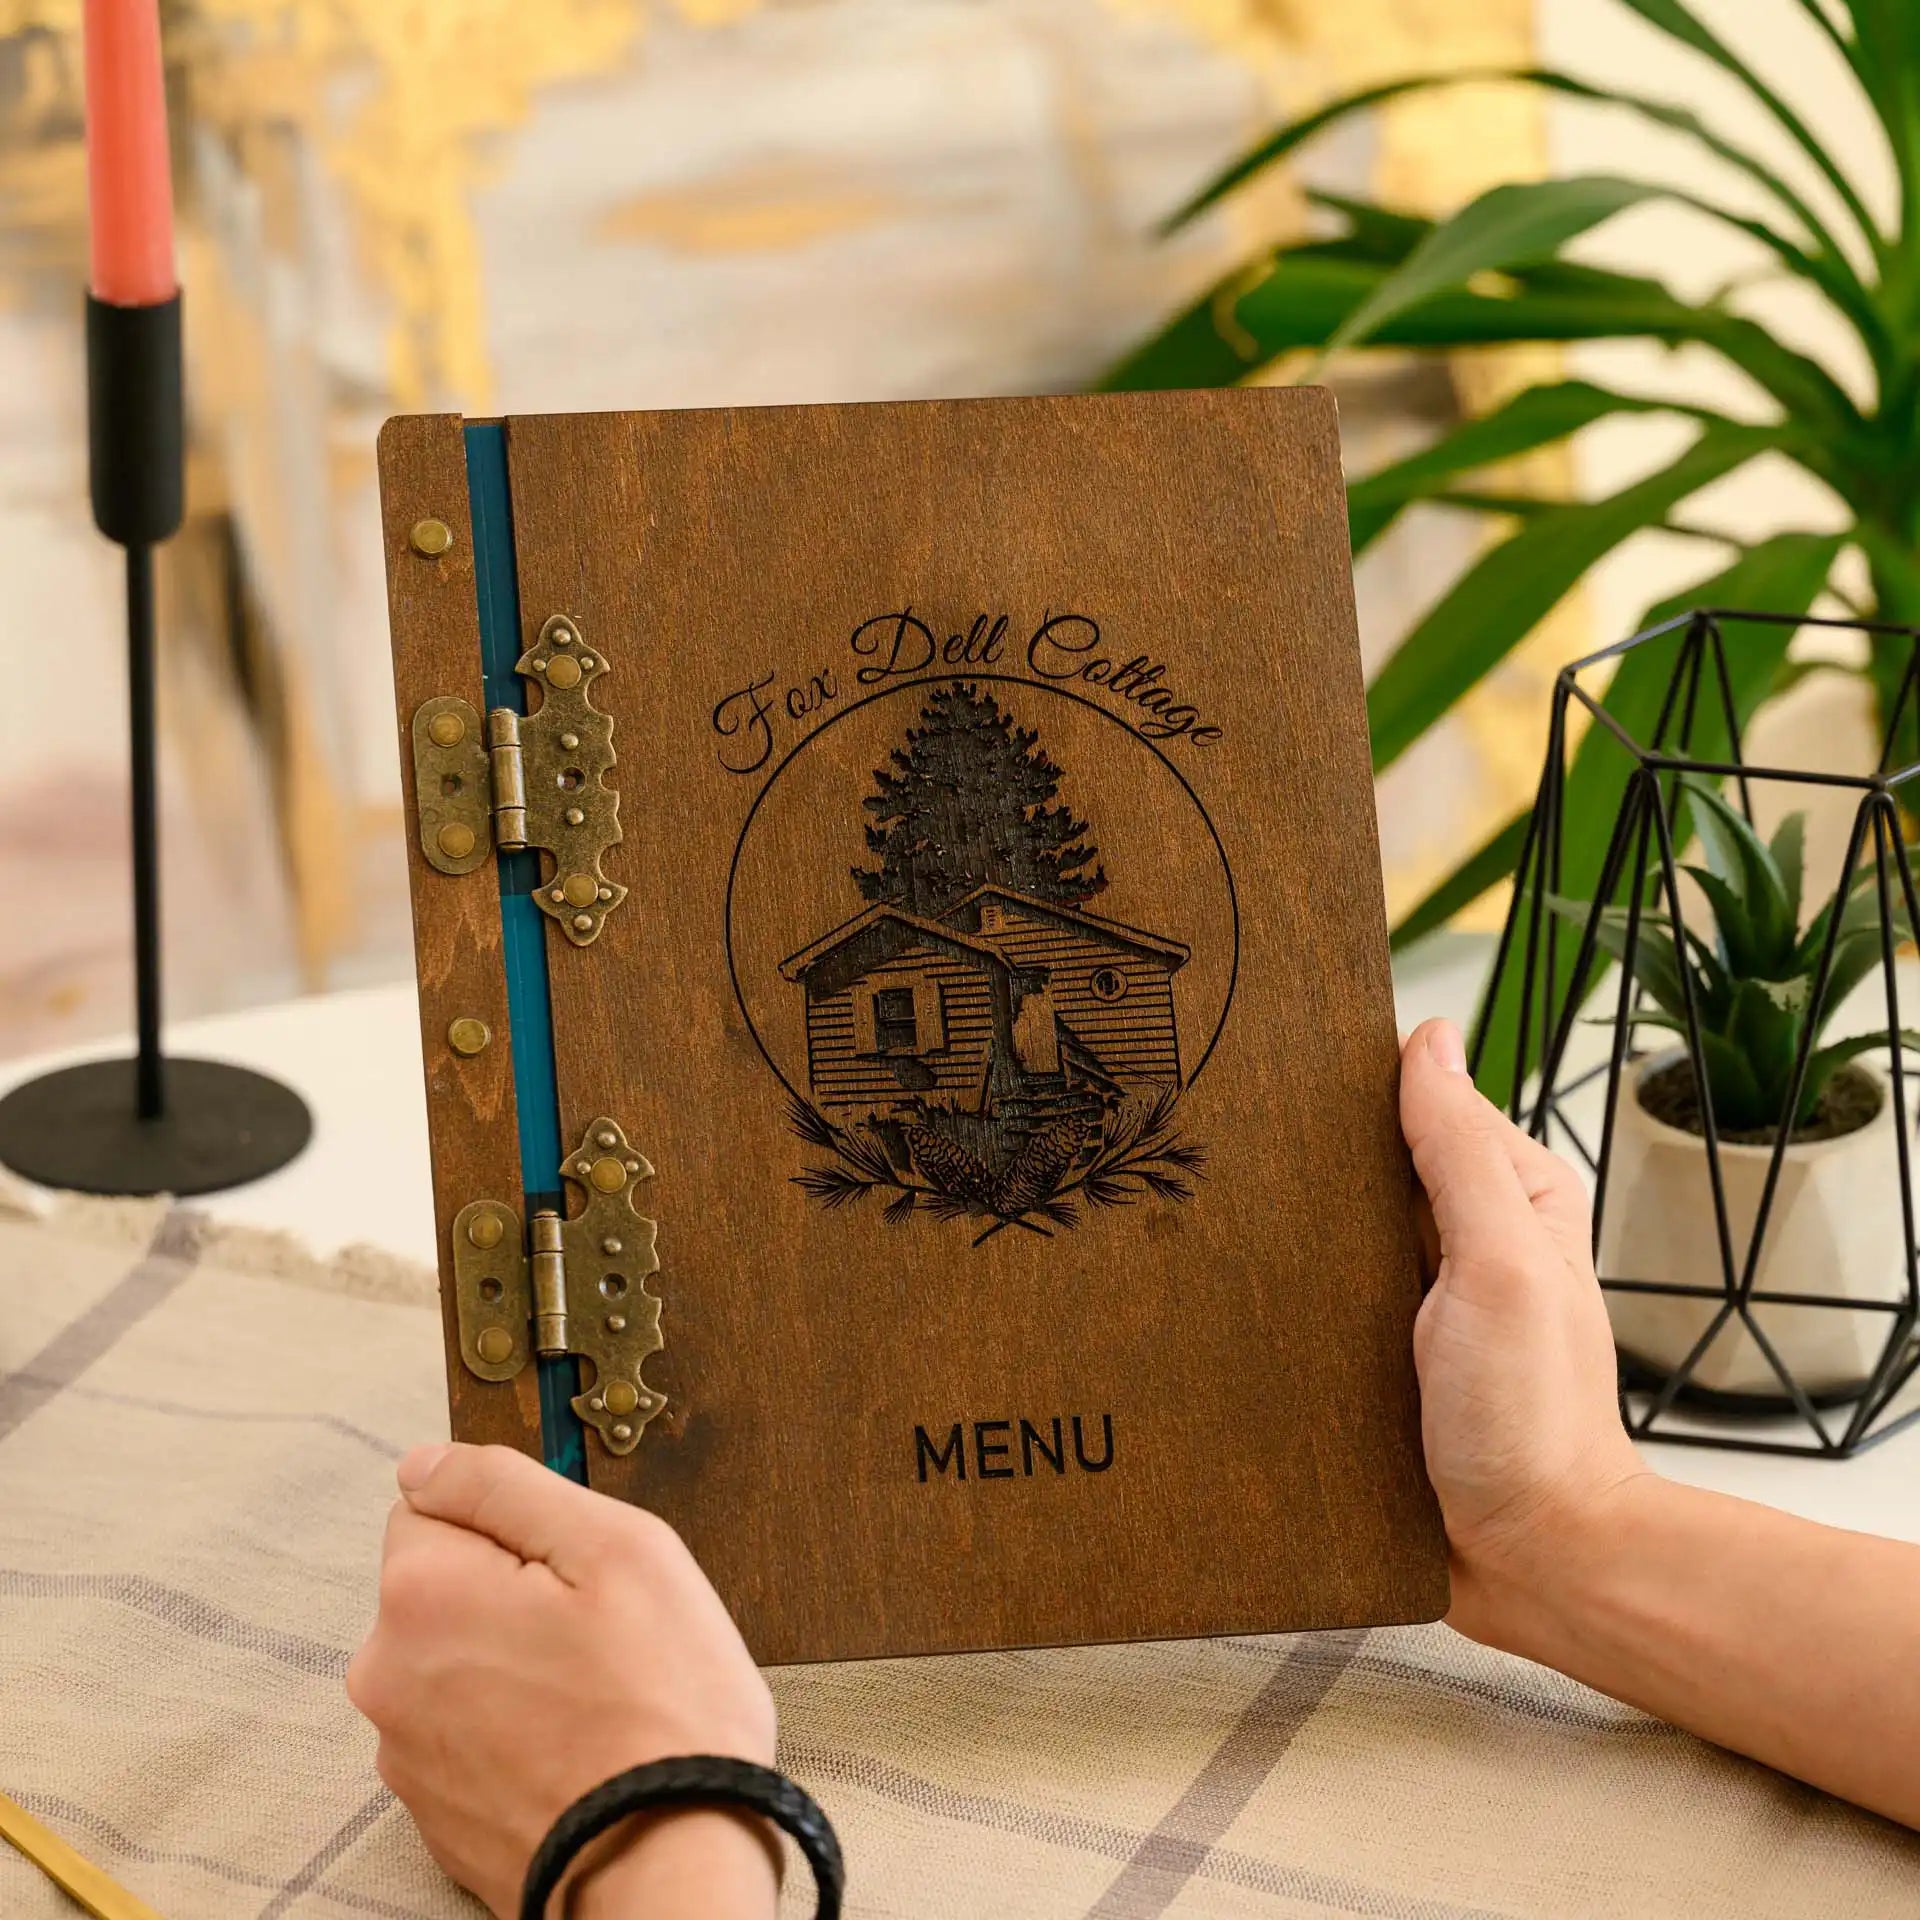 Engraved Menu Holder: Elevate presentation with personalized detailing on classic wood.